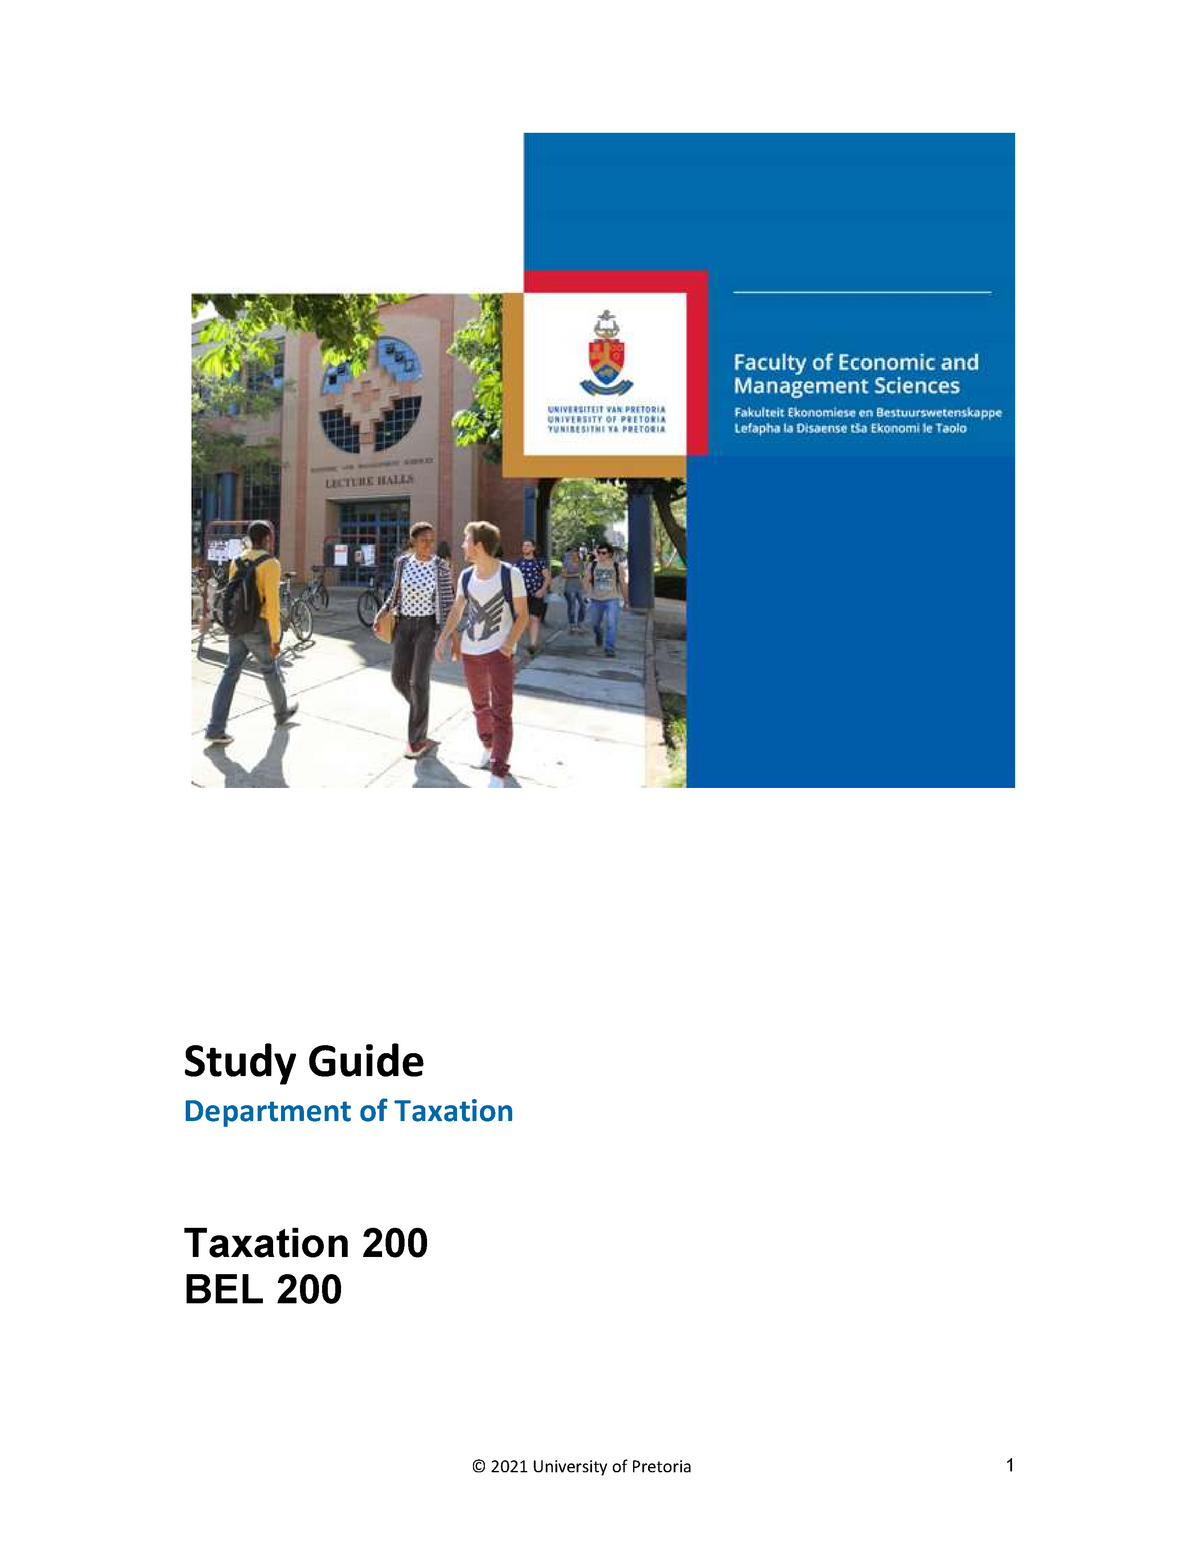 bel-200-study-guide-2021-1-study-guide-department-of-taxation